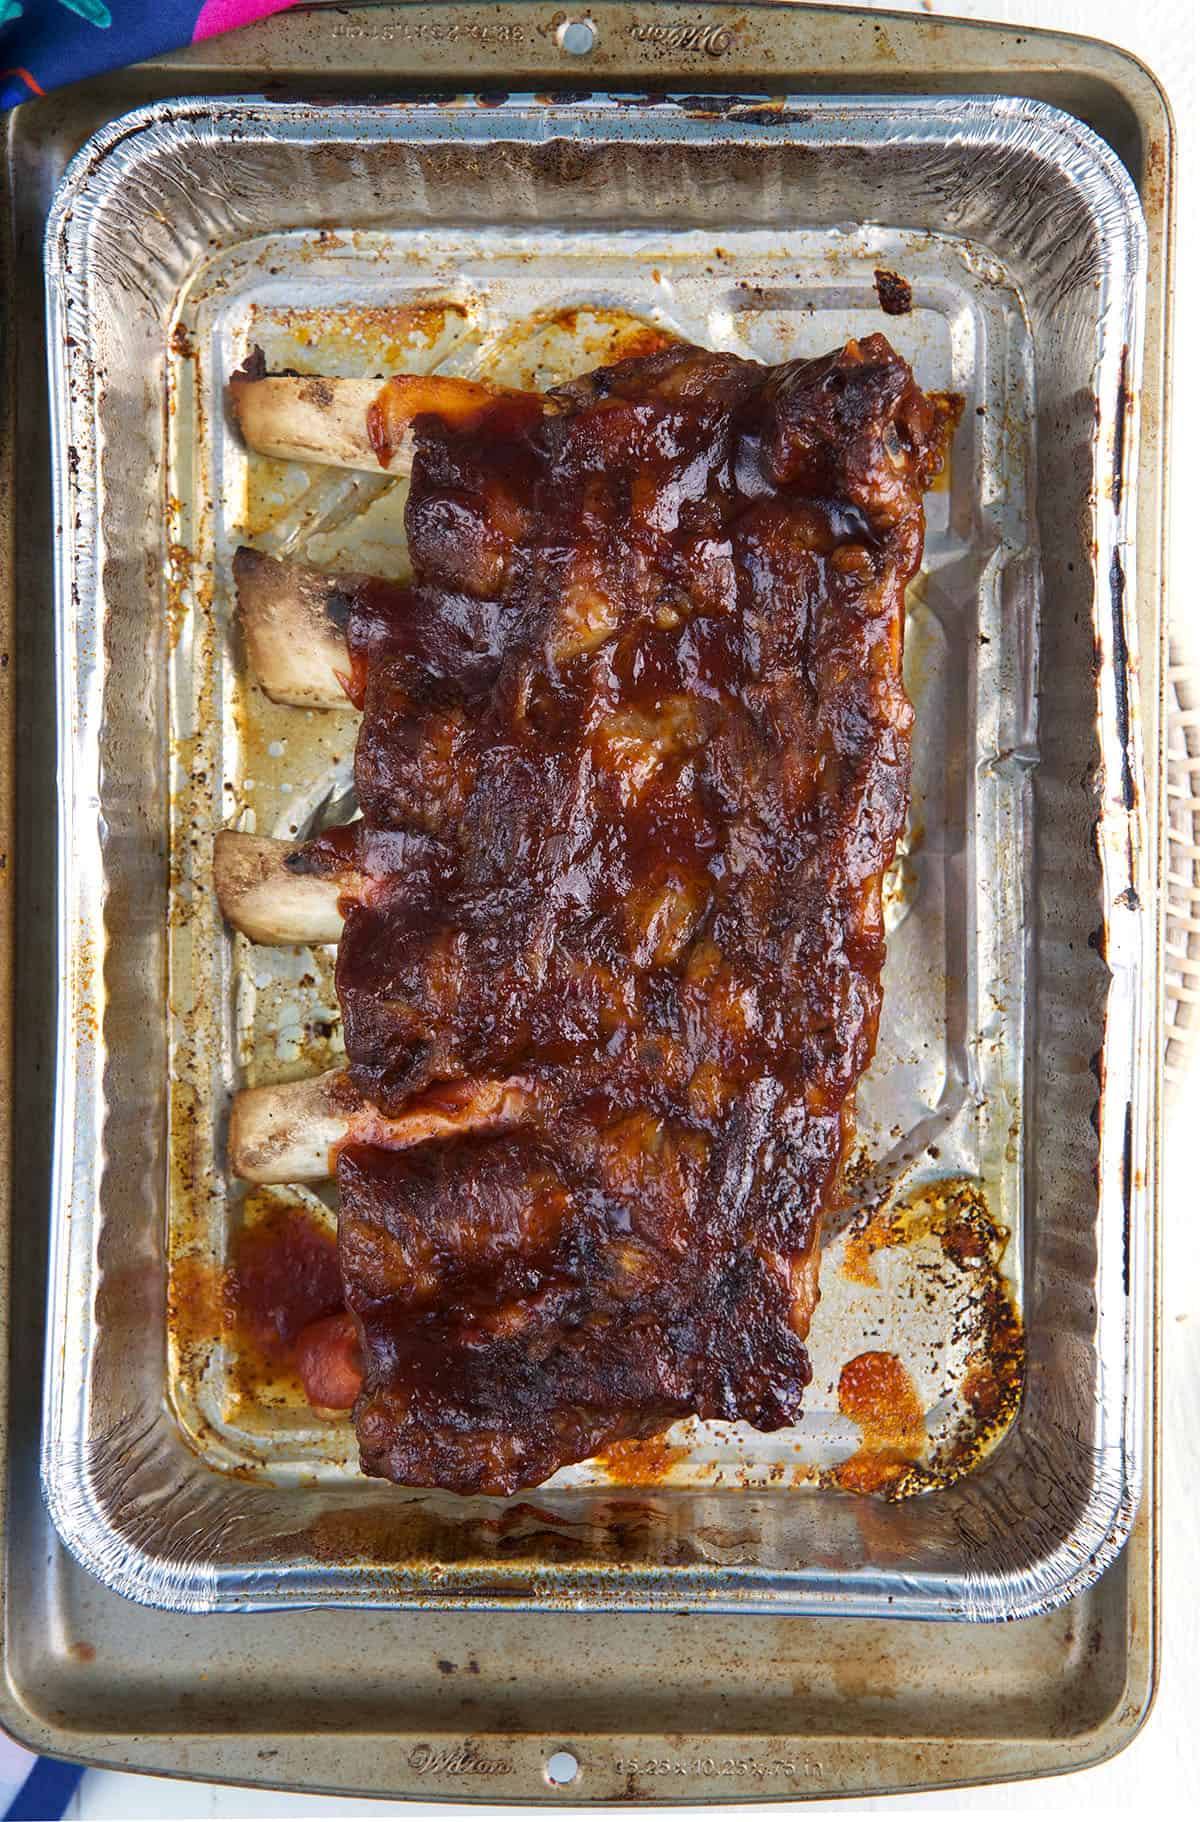 Ribs are presented in a baking dish.